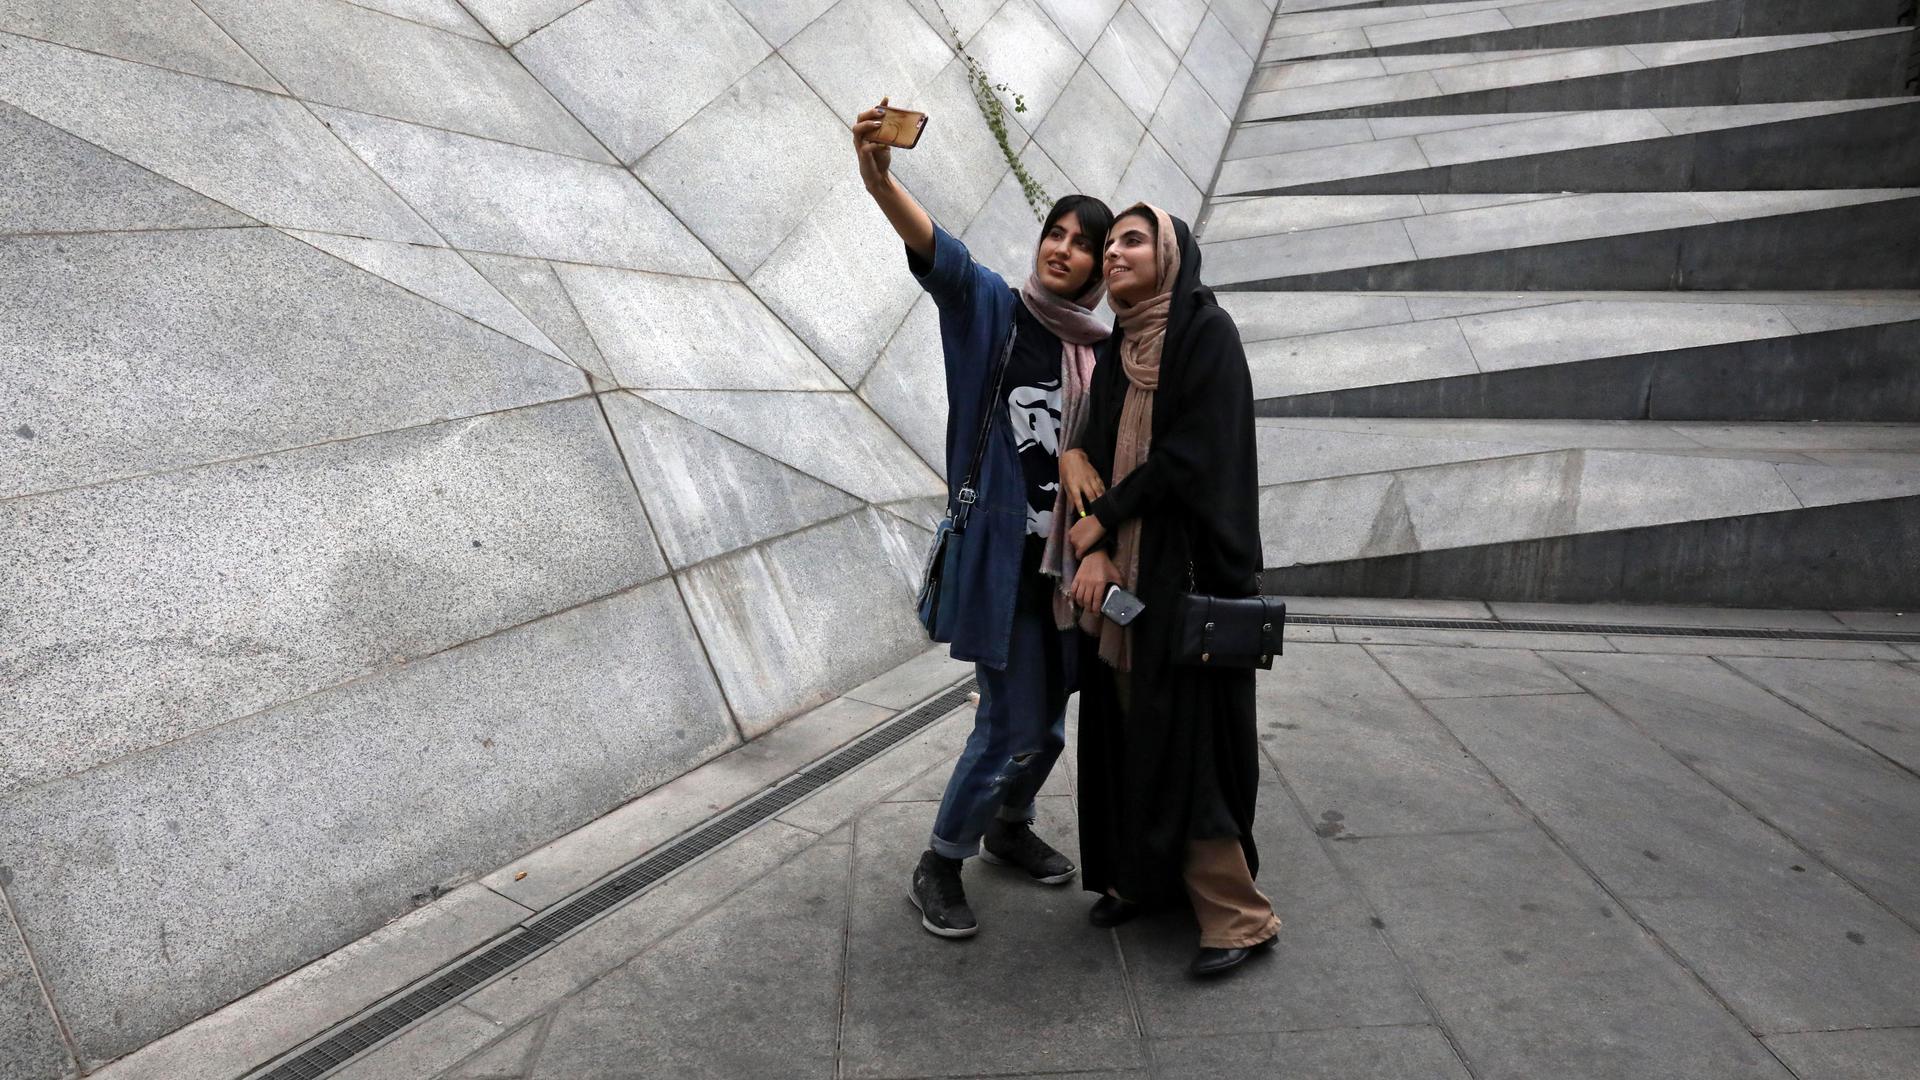 Two Iranian women take a selfie outside a shopping mall in northern Tehran, Iran, on July 2, 2019.